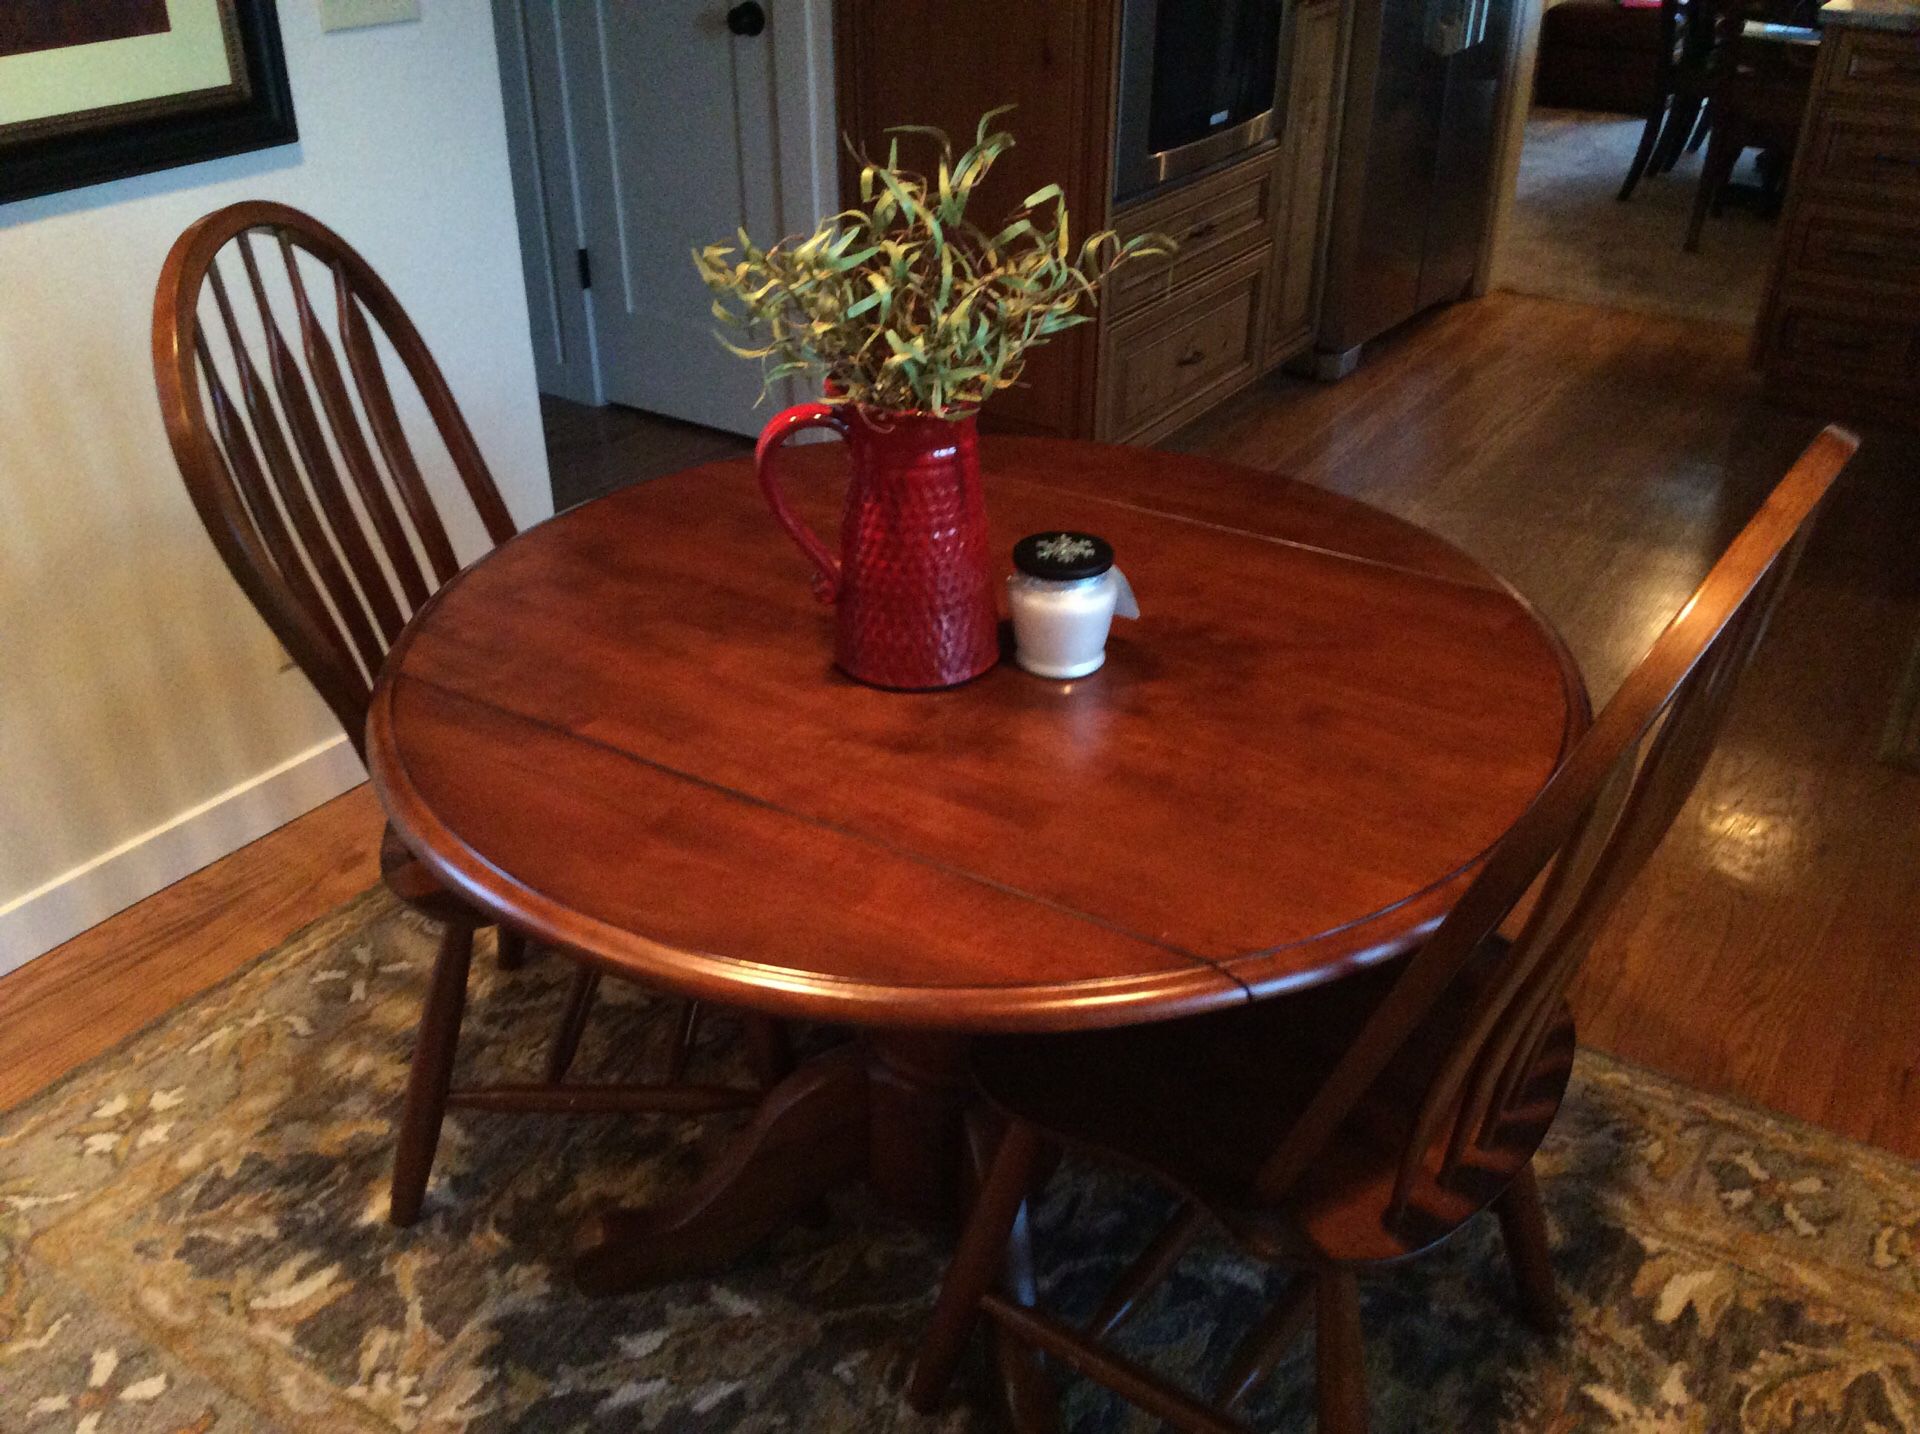 3 piece drop leaf wooden table and chairs